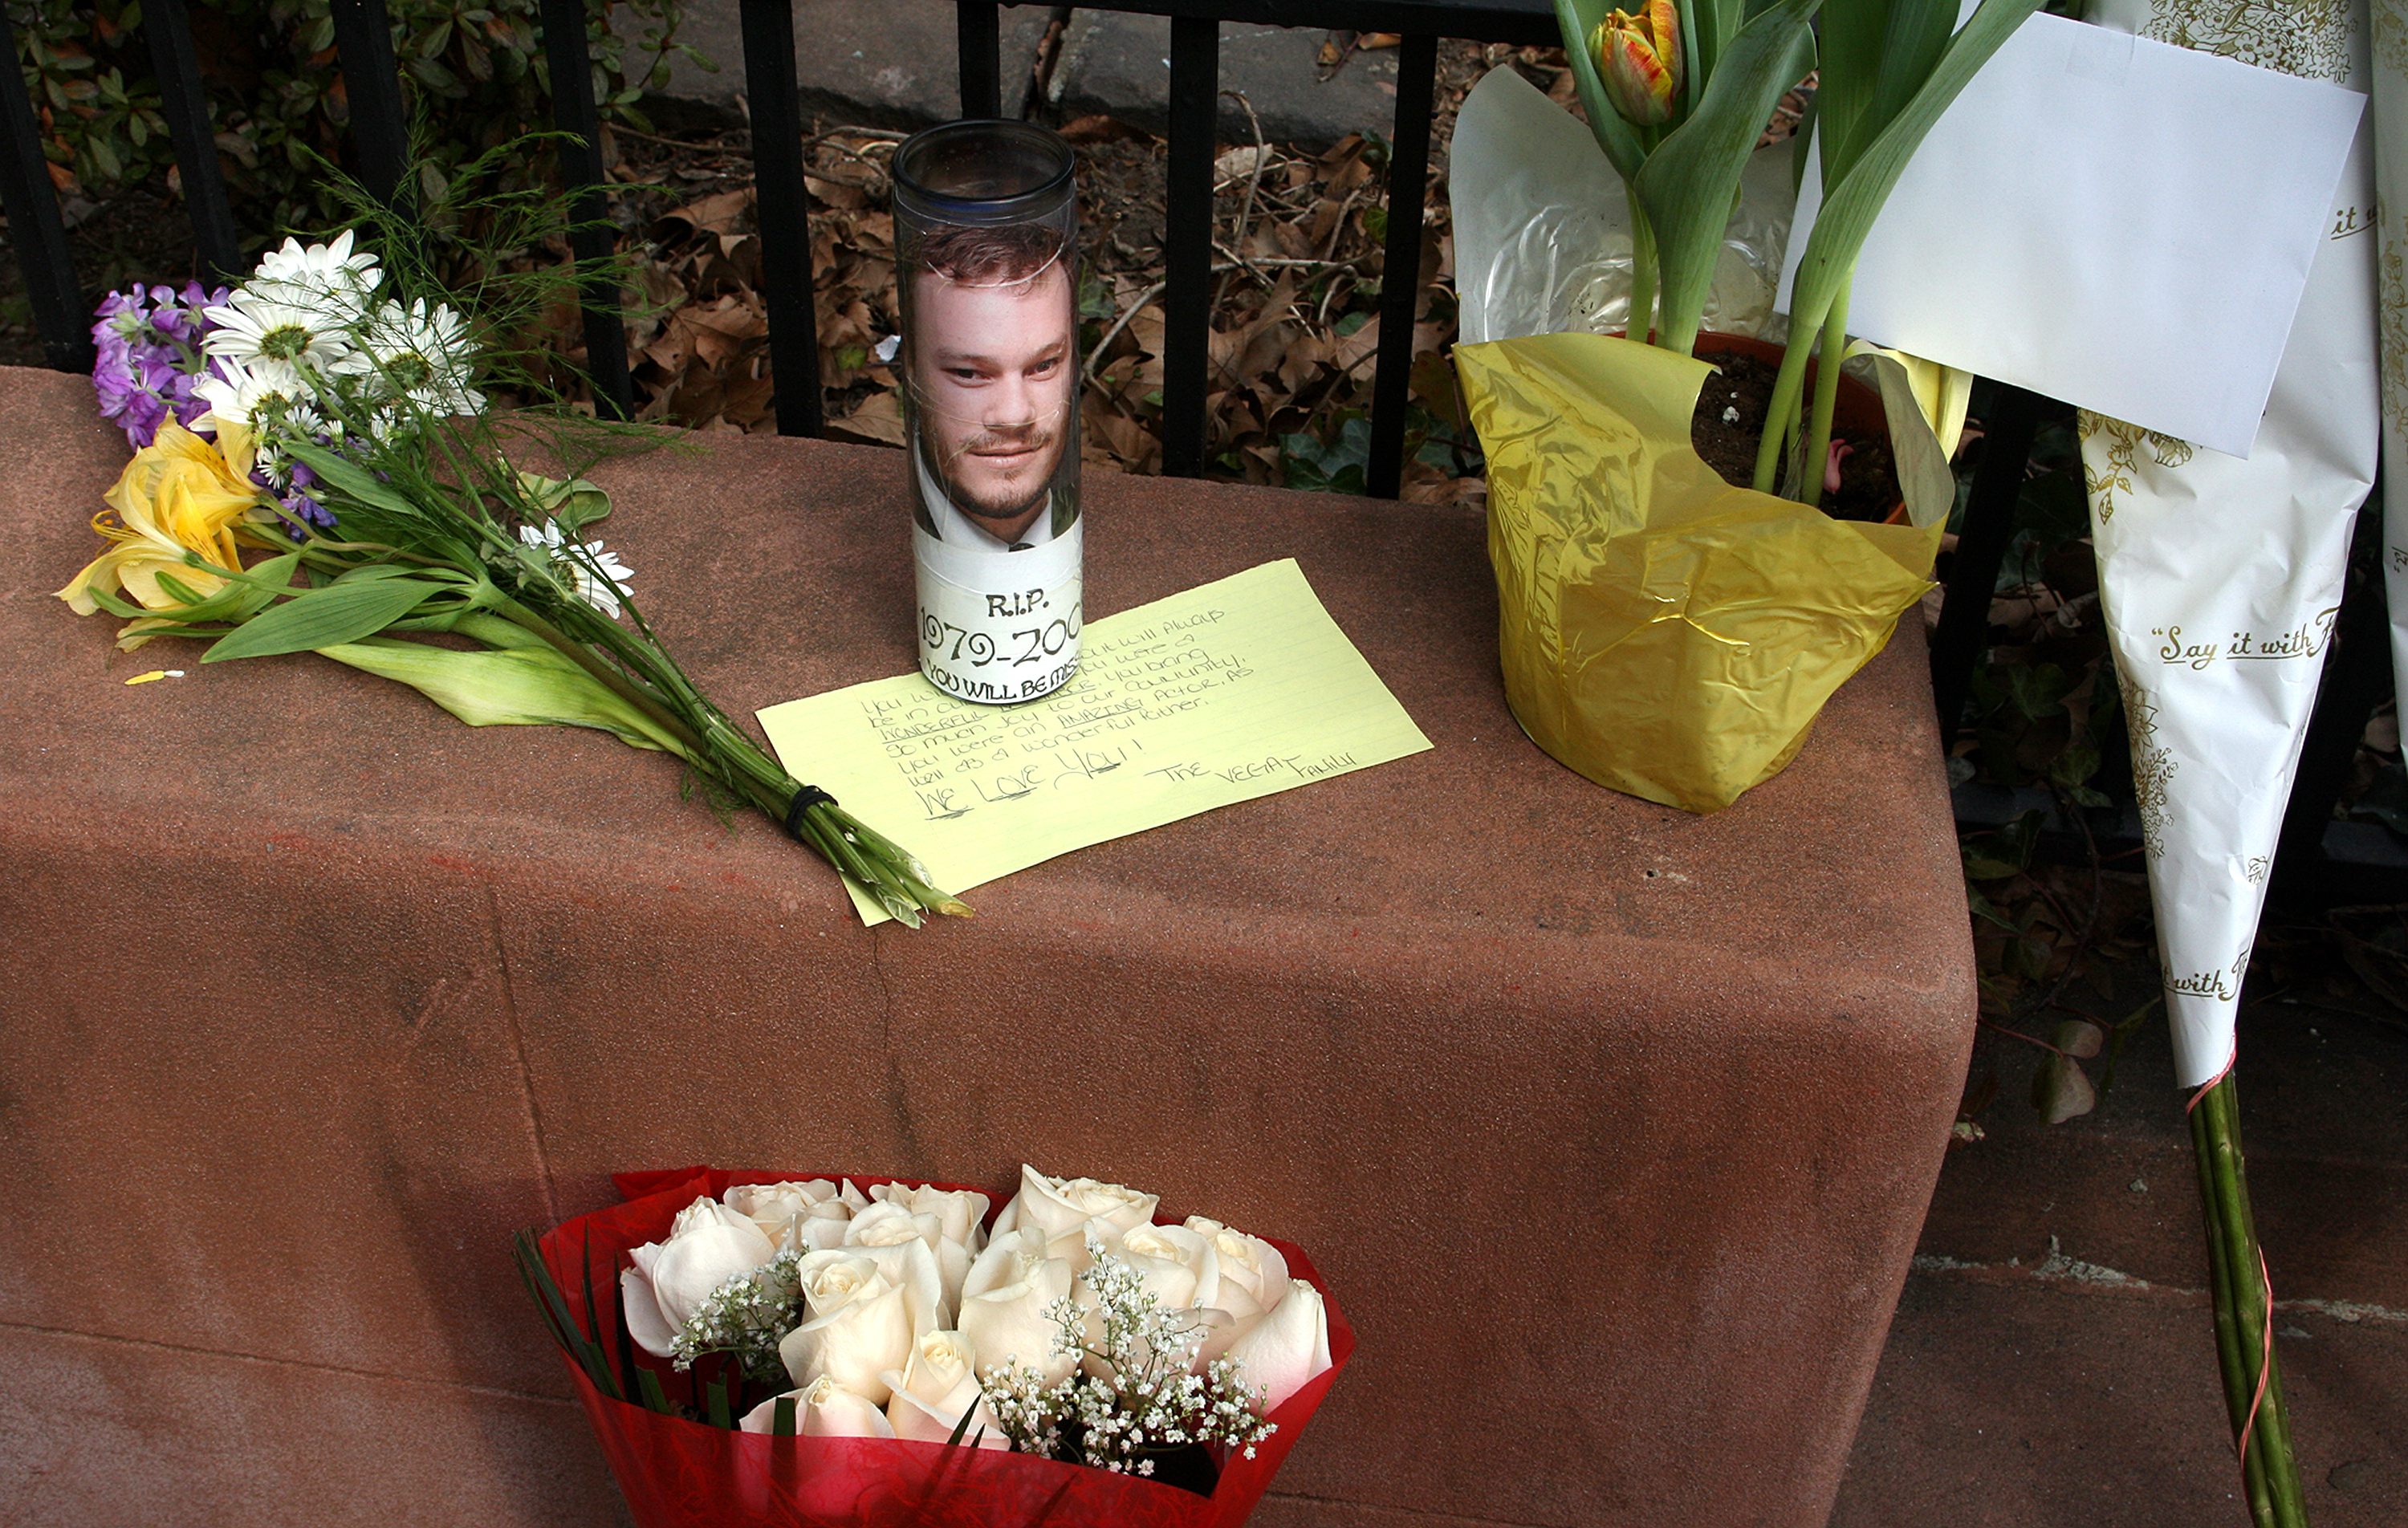 Candles, flowers, and notes left on Michelle William and Matilda Ledger's doorstep after the death of Heath Ledger | Source: Getty Images